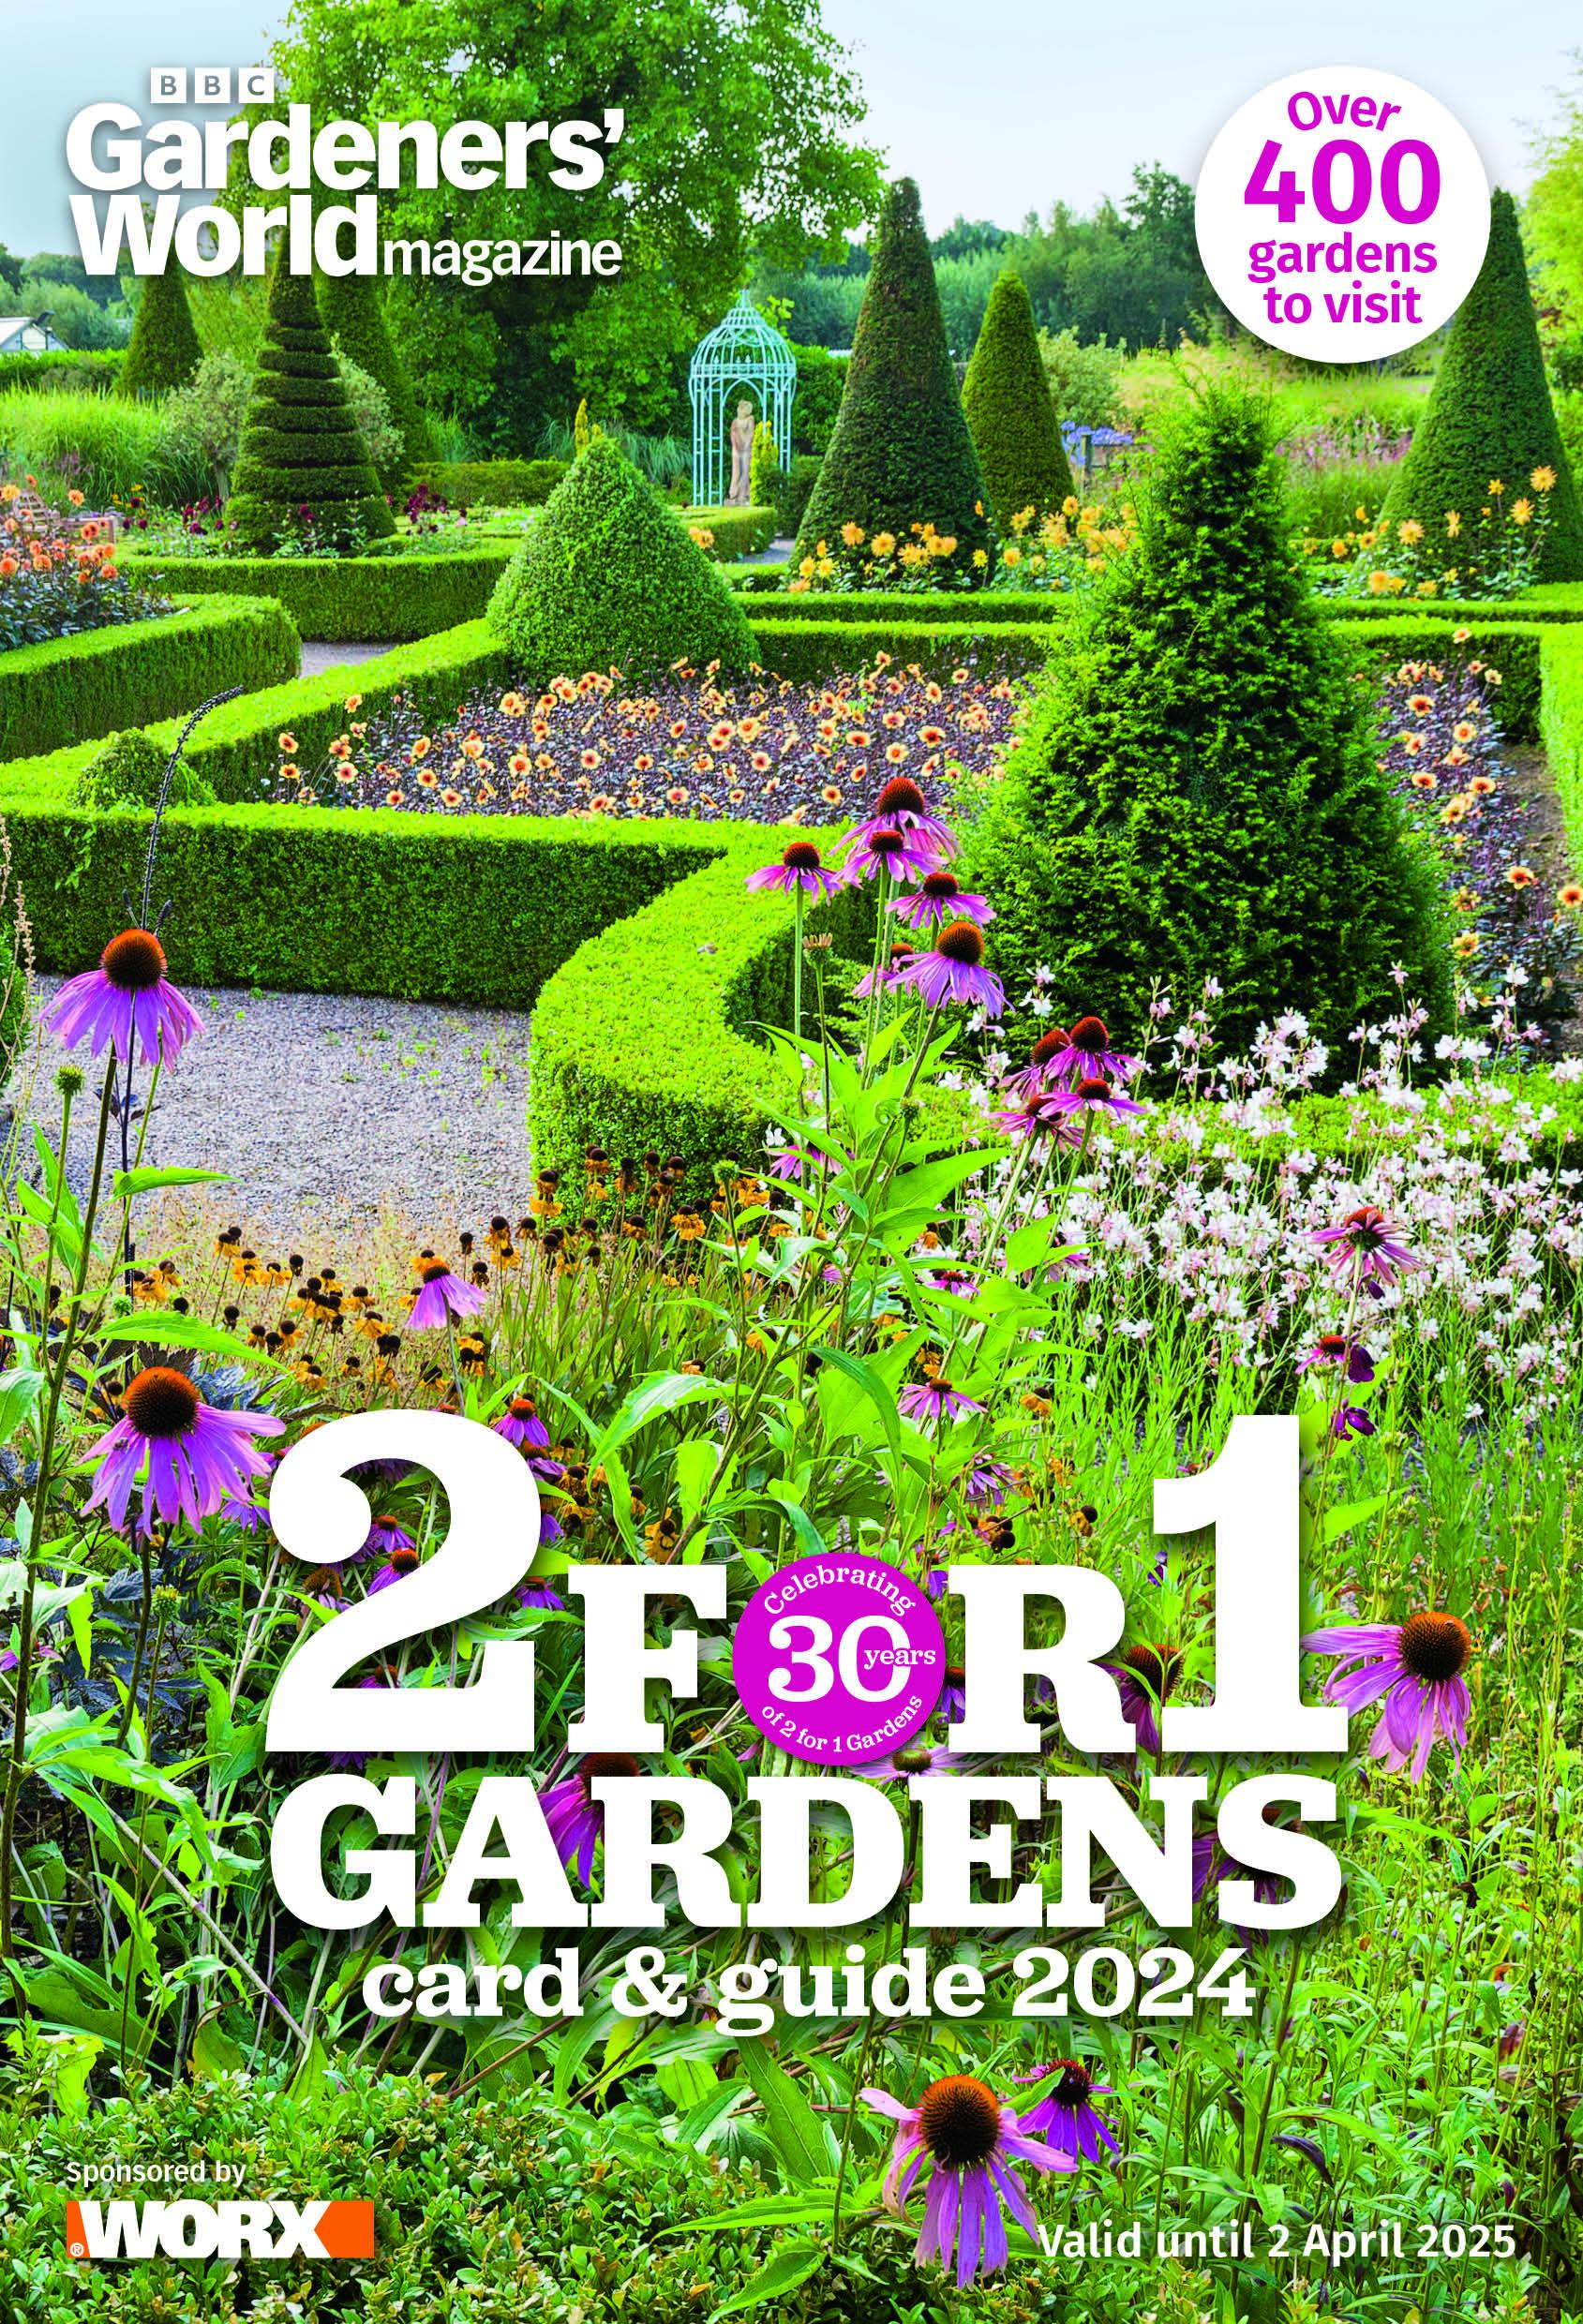 BBC Gardeners’ World 2 for 1 Gardens card and guide 2024/25